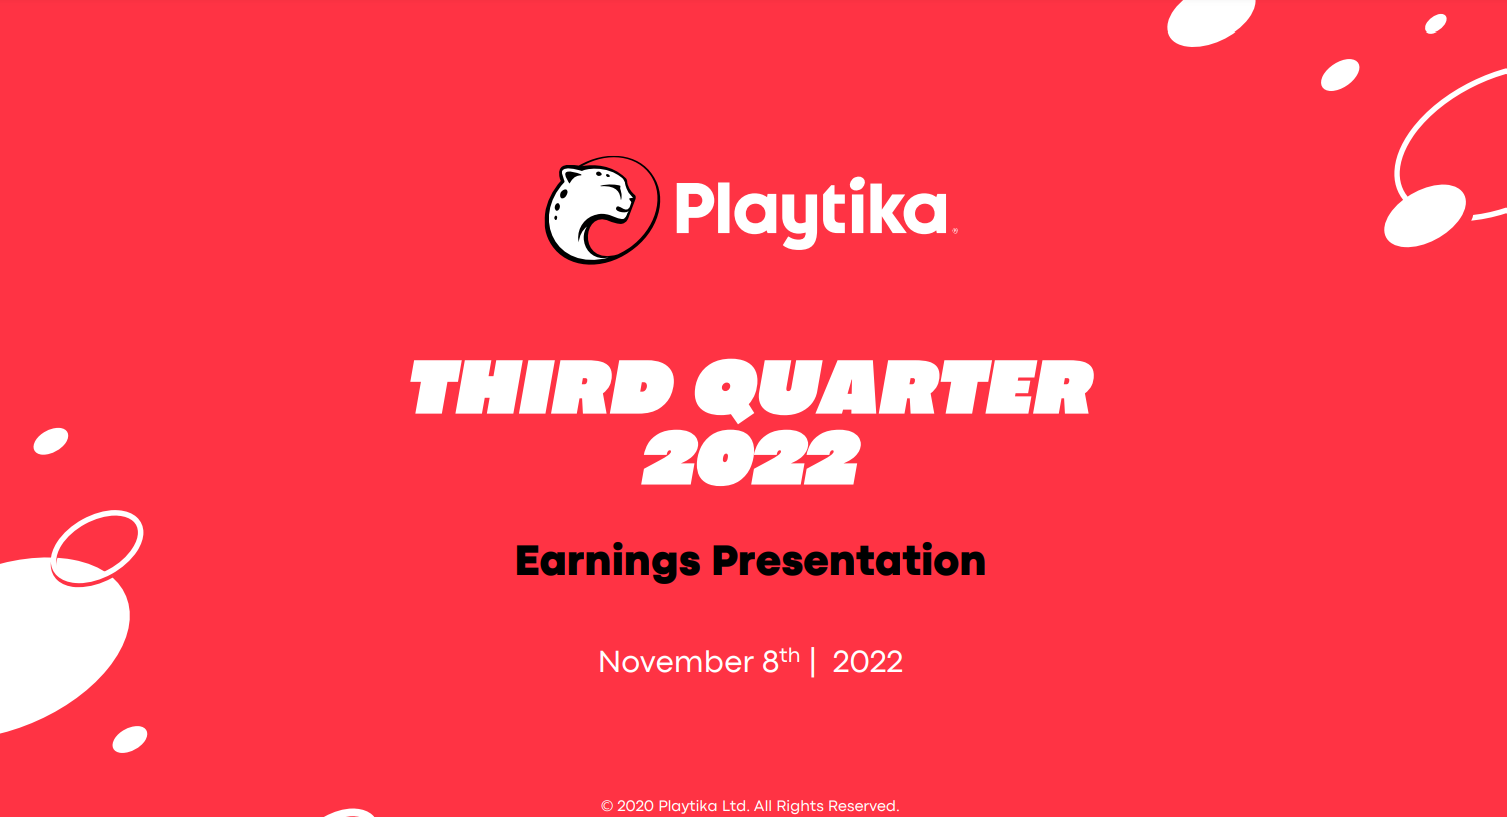 Playtika casual games bring in the most revenue